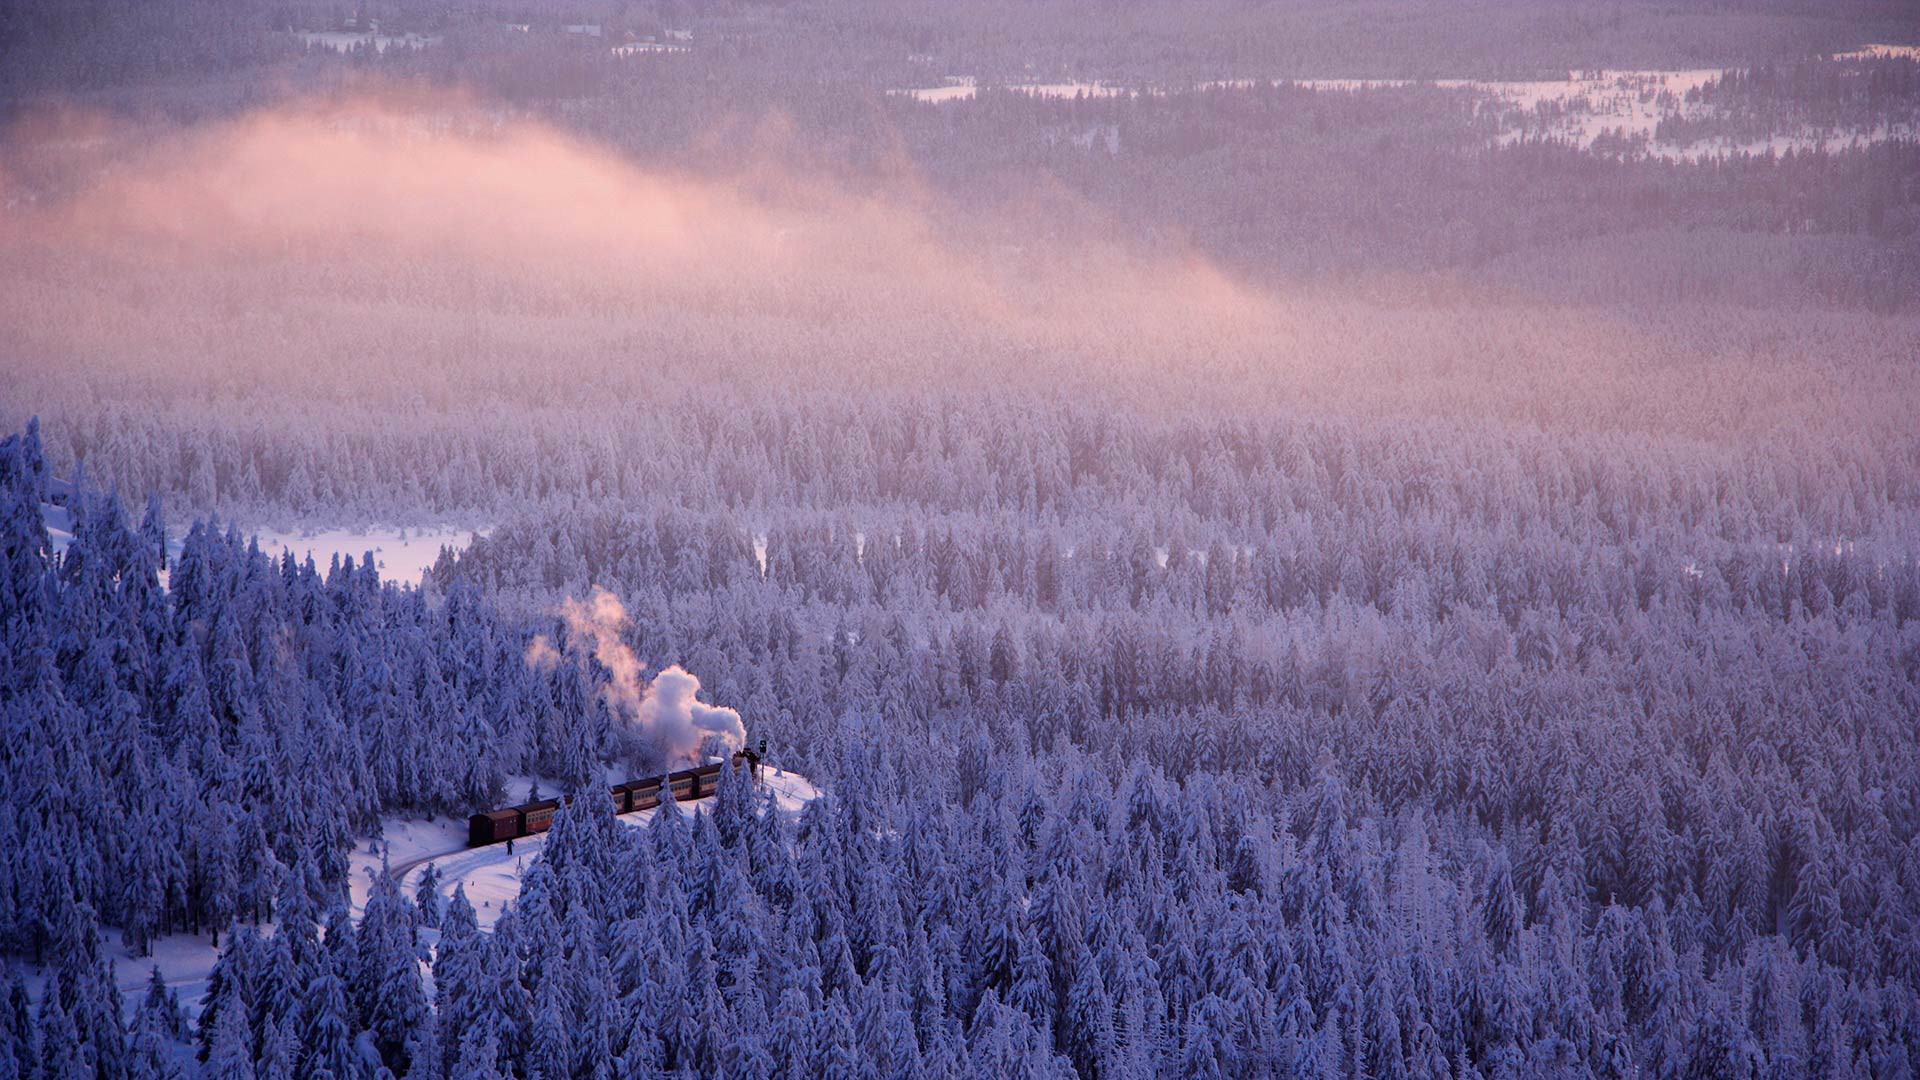 Landscape Snow Train Saxonia Germany Pine Trees Forest Nature Winter Mist Smoke Trees Cold Railway 1920x1080